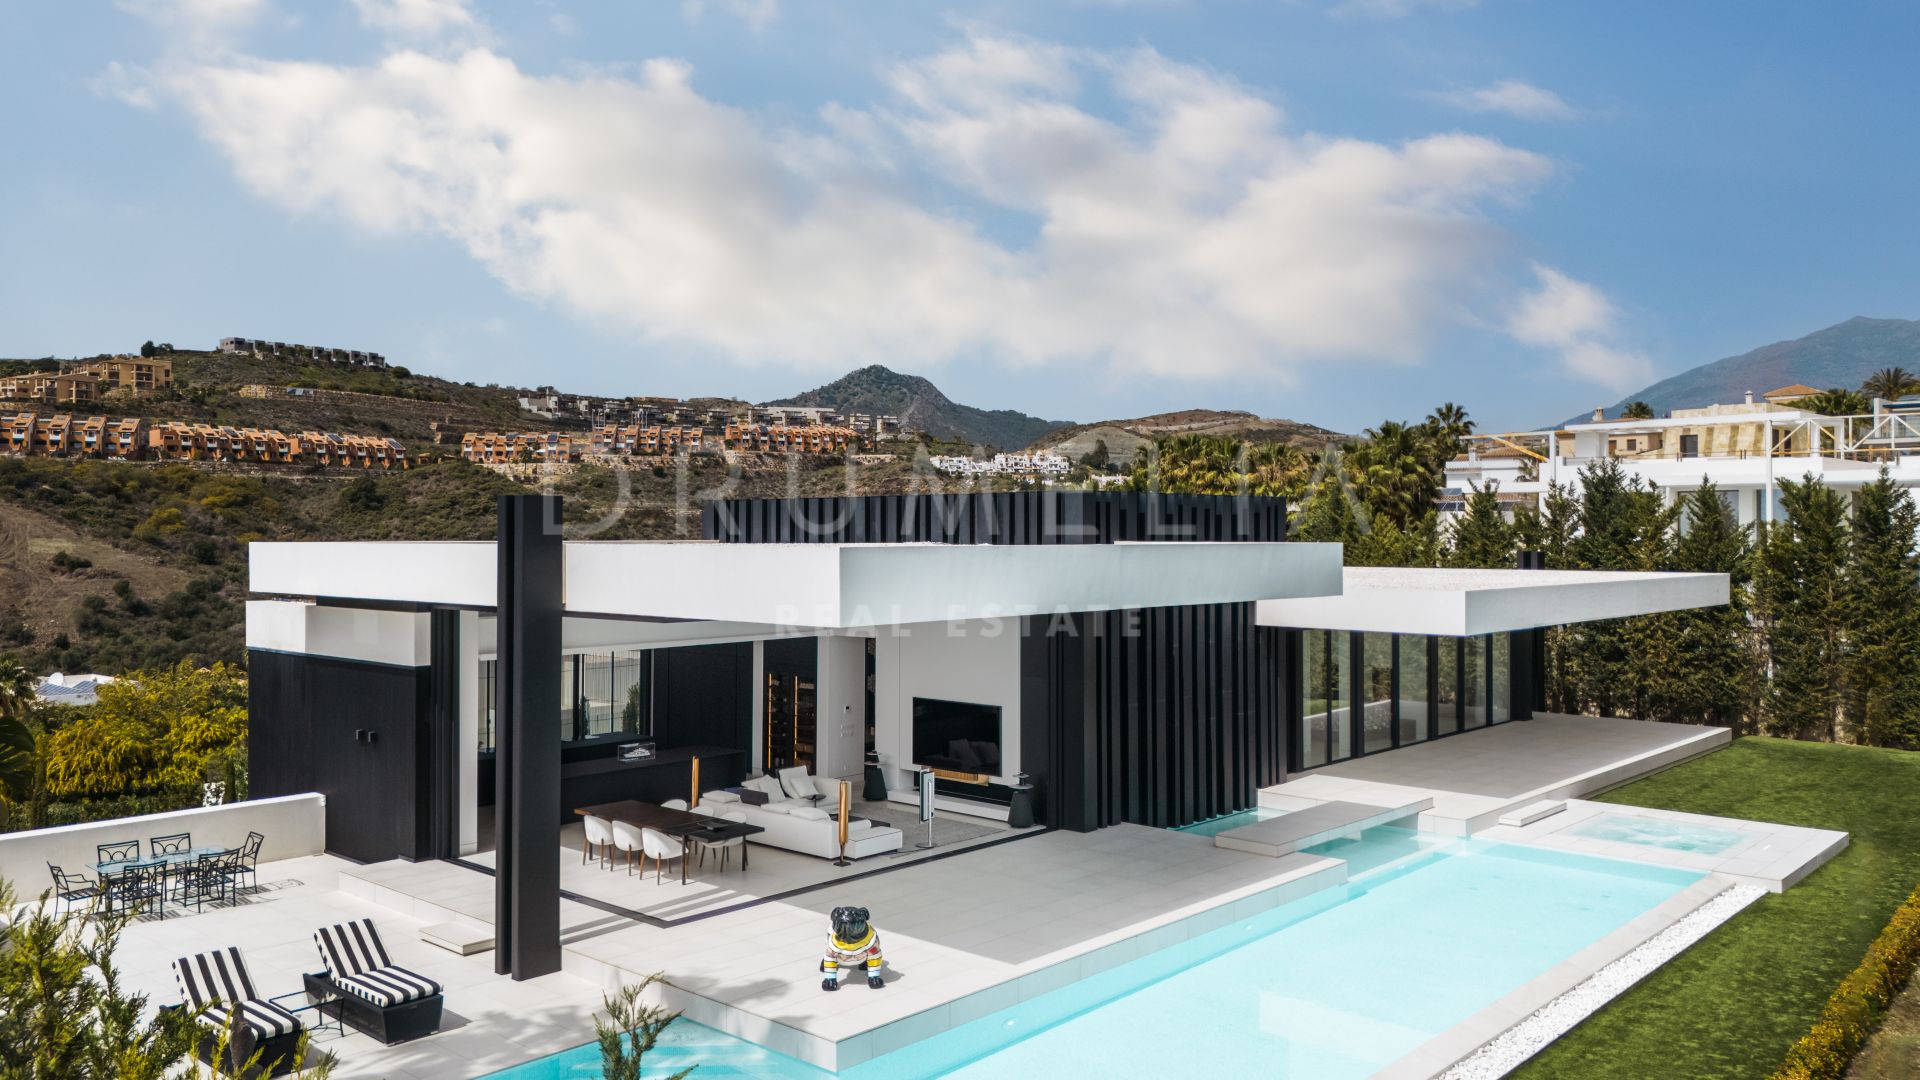 Villa Nebbia -Exquisite Frontline Golf Property with Stunning Views and High-End Features, La Alqueria, Benahavis